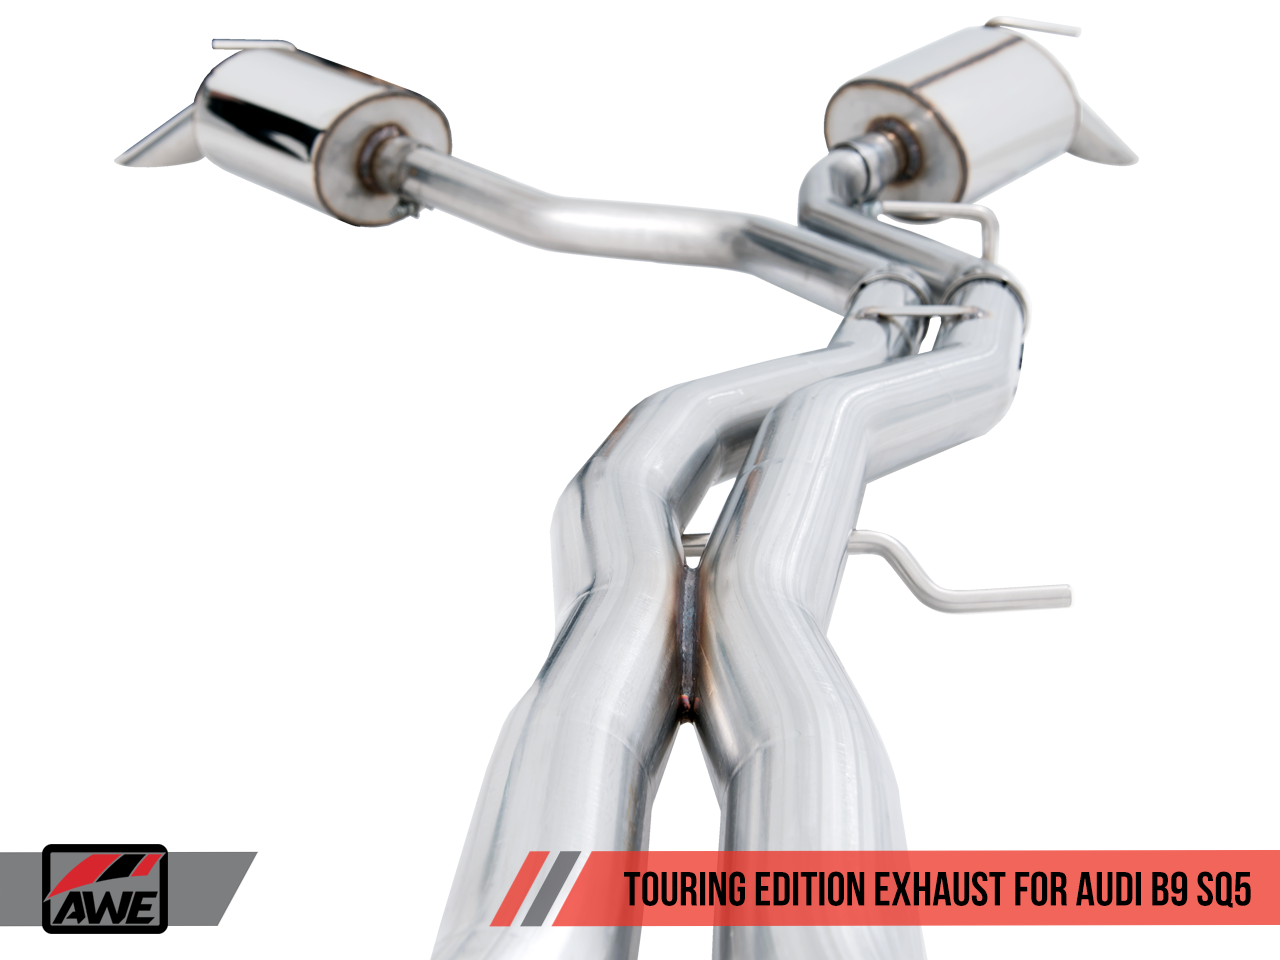 AWE Touring Edition Exhaust for Audi B9 SQ5 - Resonated - No Tips (Turn Downs) - Motorsports LA